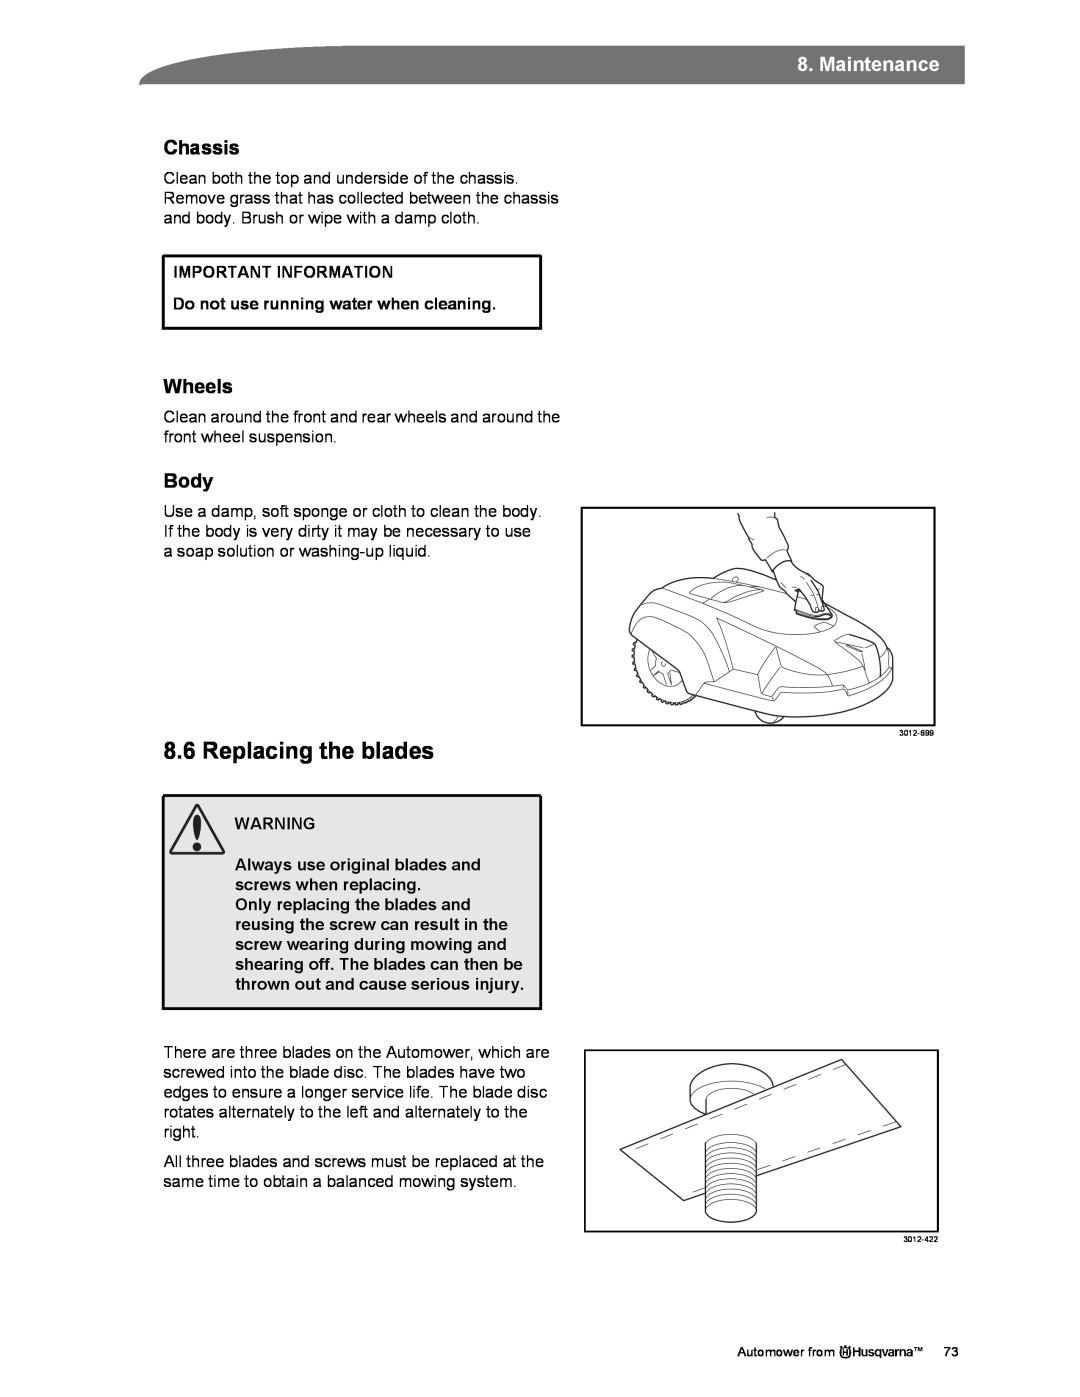 Husqvarna Automower manual Replacing the blades, Chassis, Wheels, Body, Do not use running water when cleaning, Maintenance 